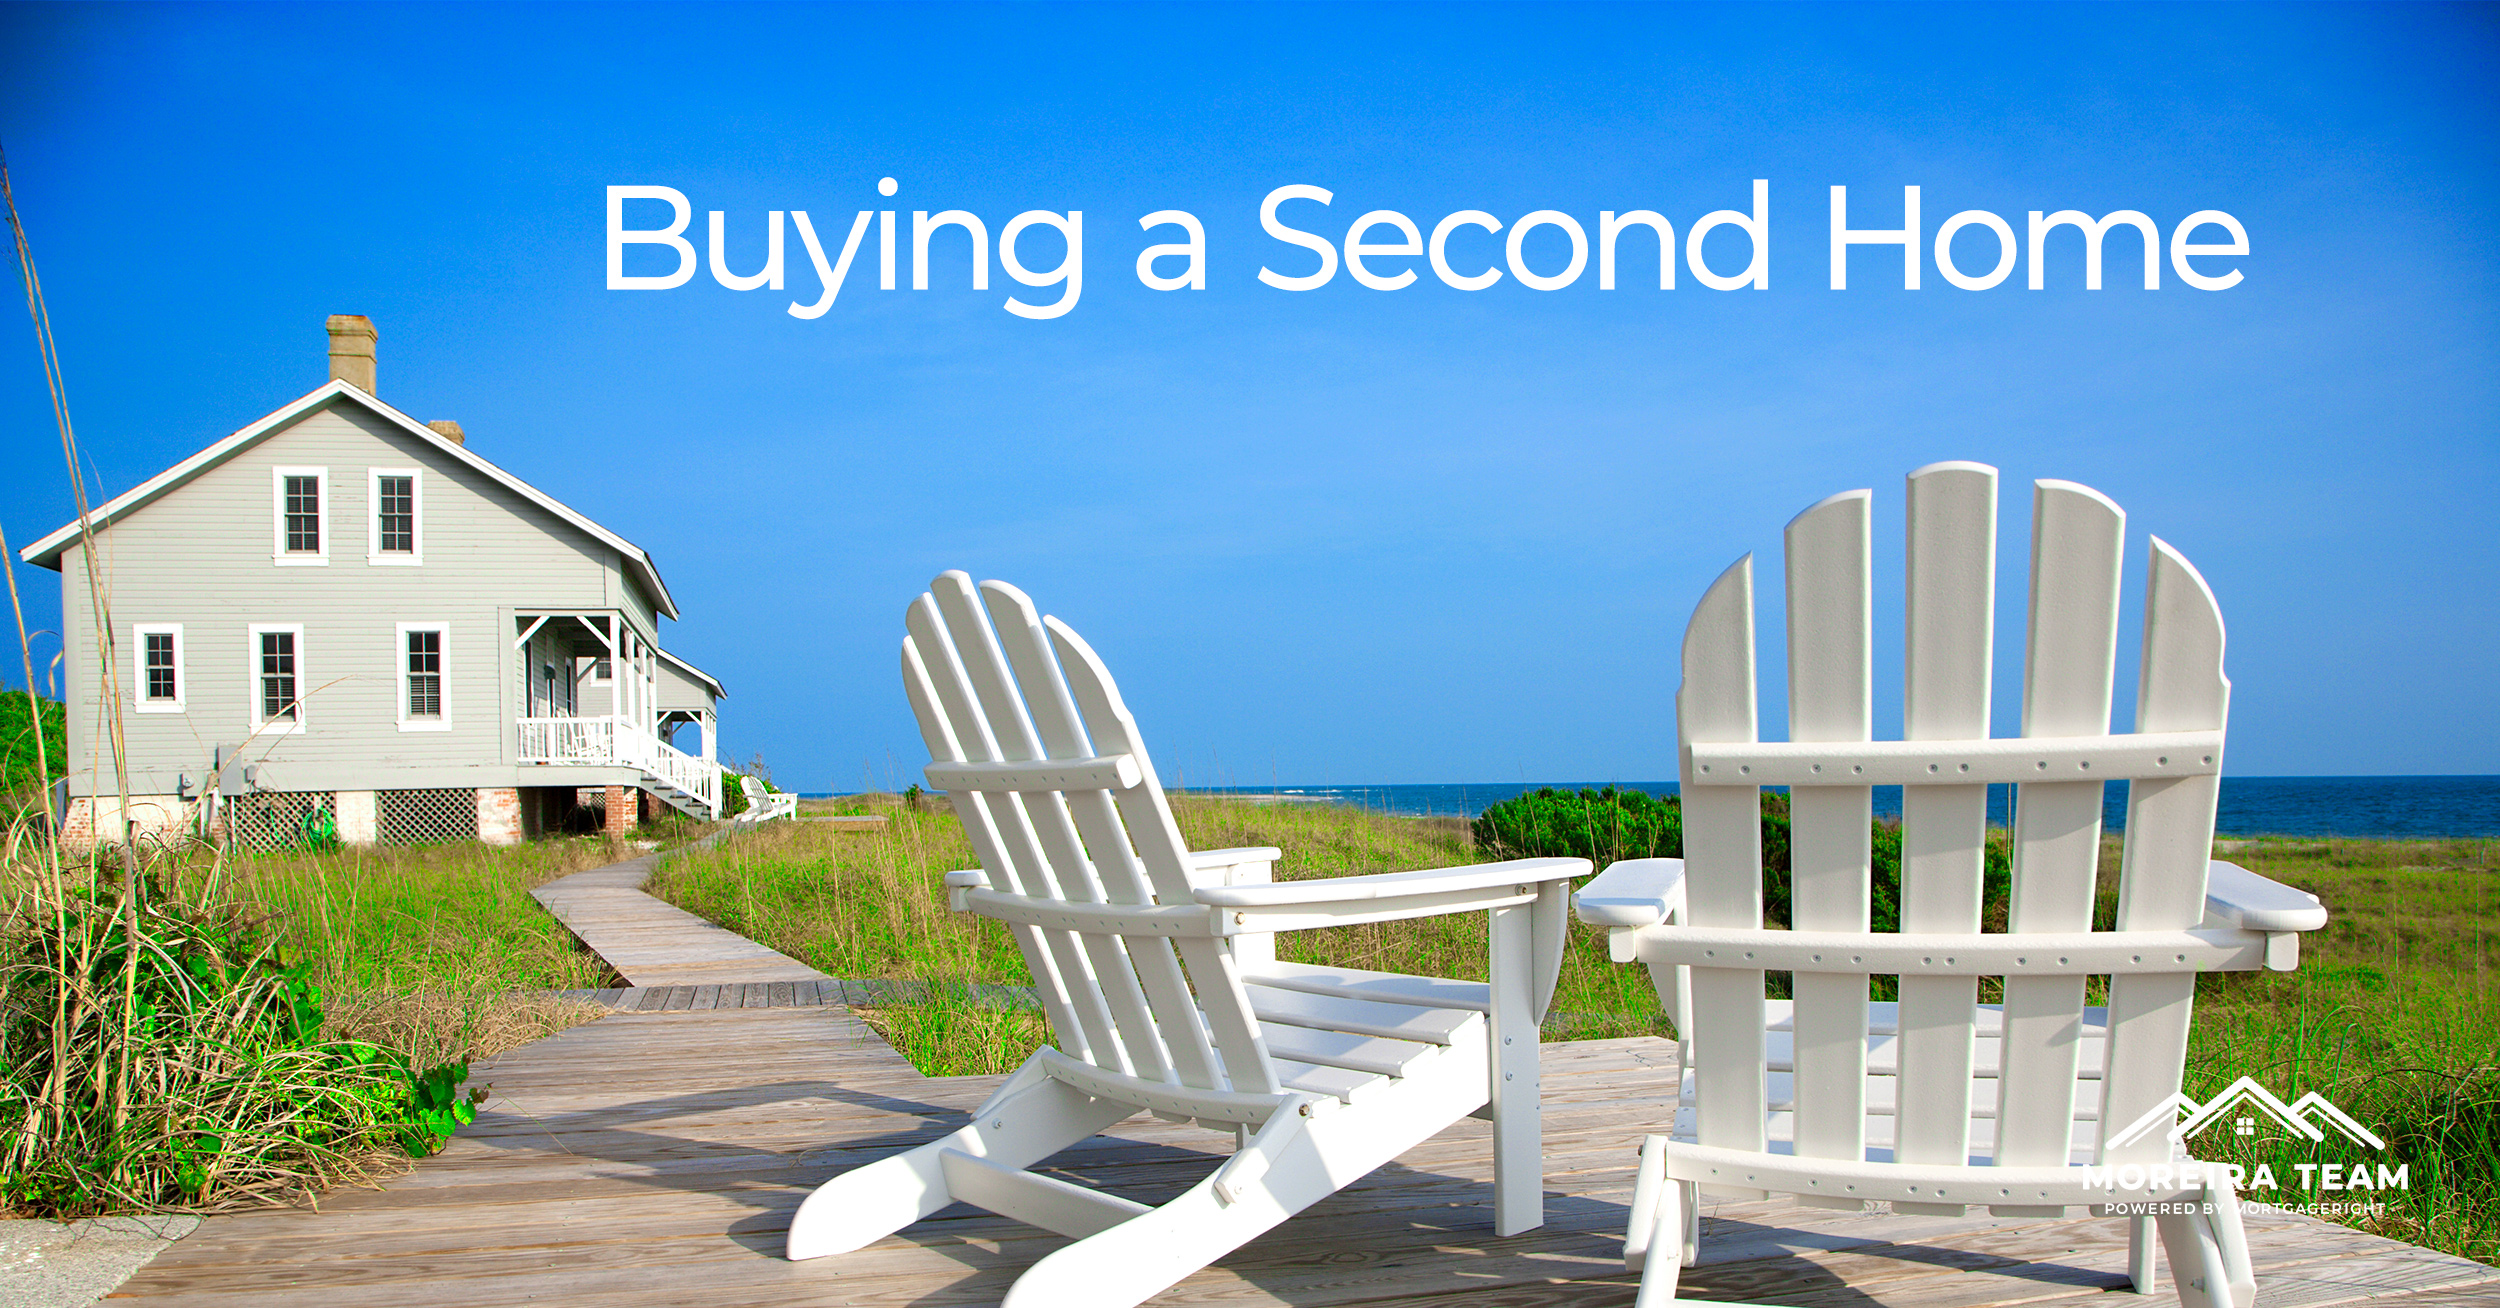 How to Buy a Second Home